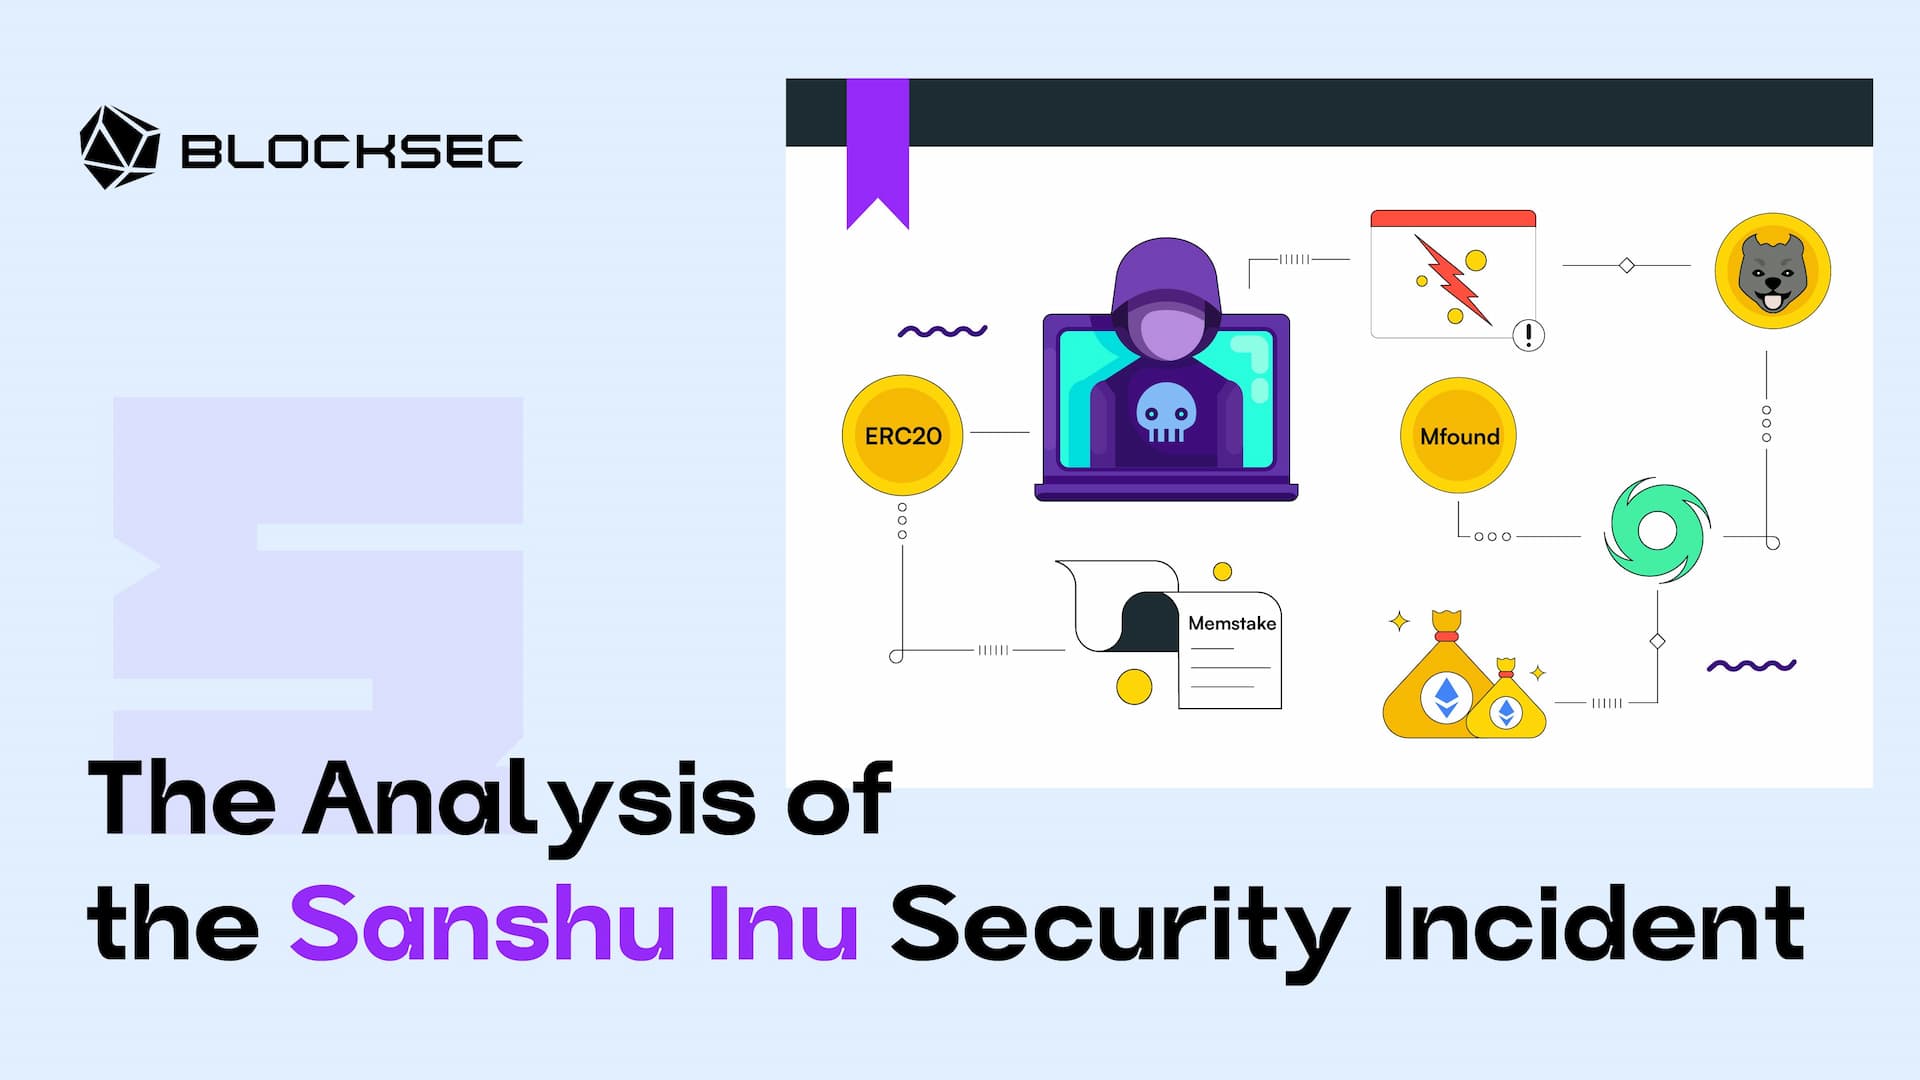 The Analysis of the Sanshu Inu Security Incident